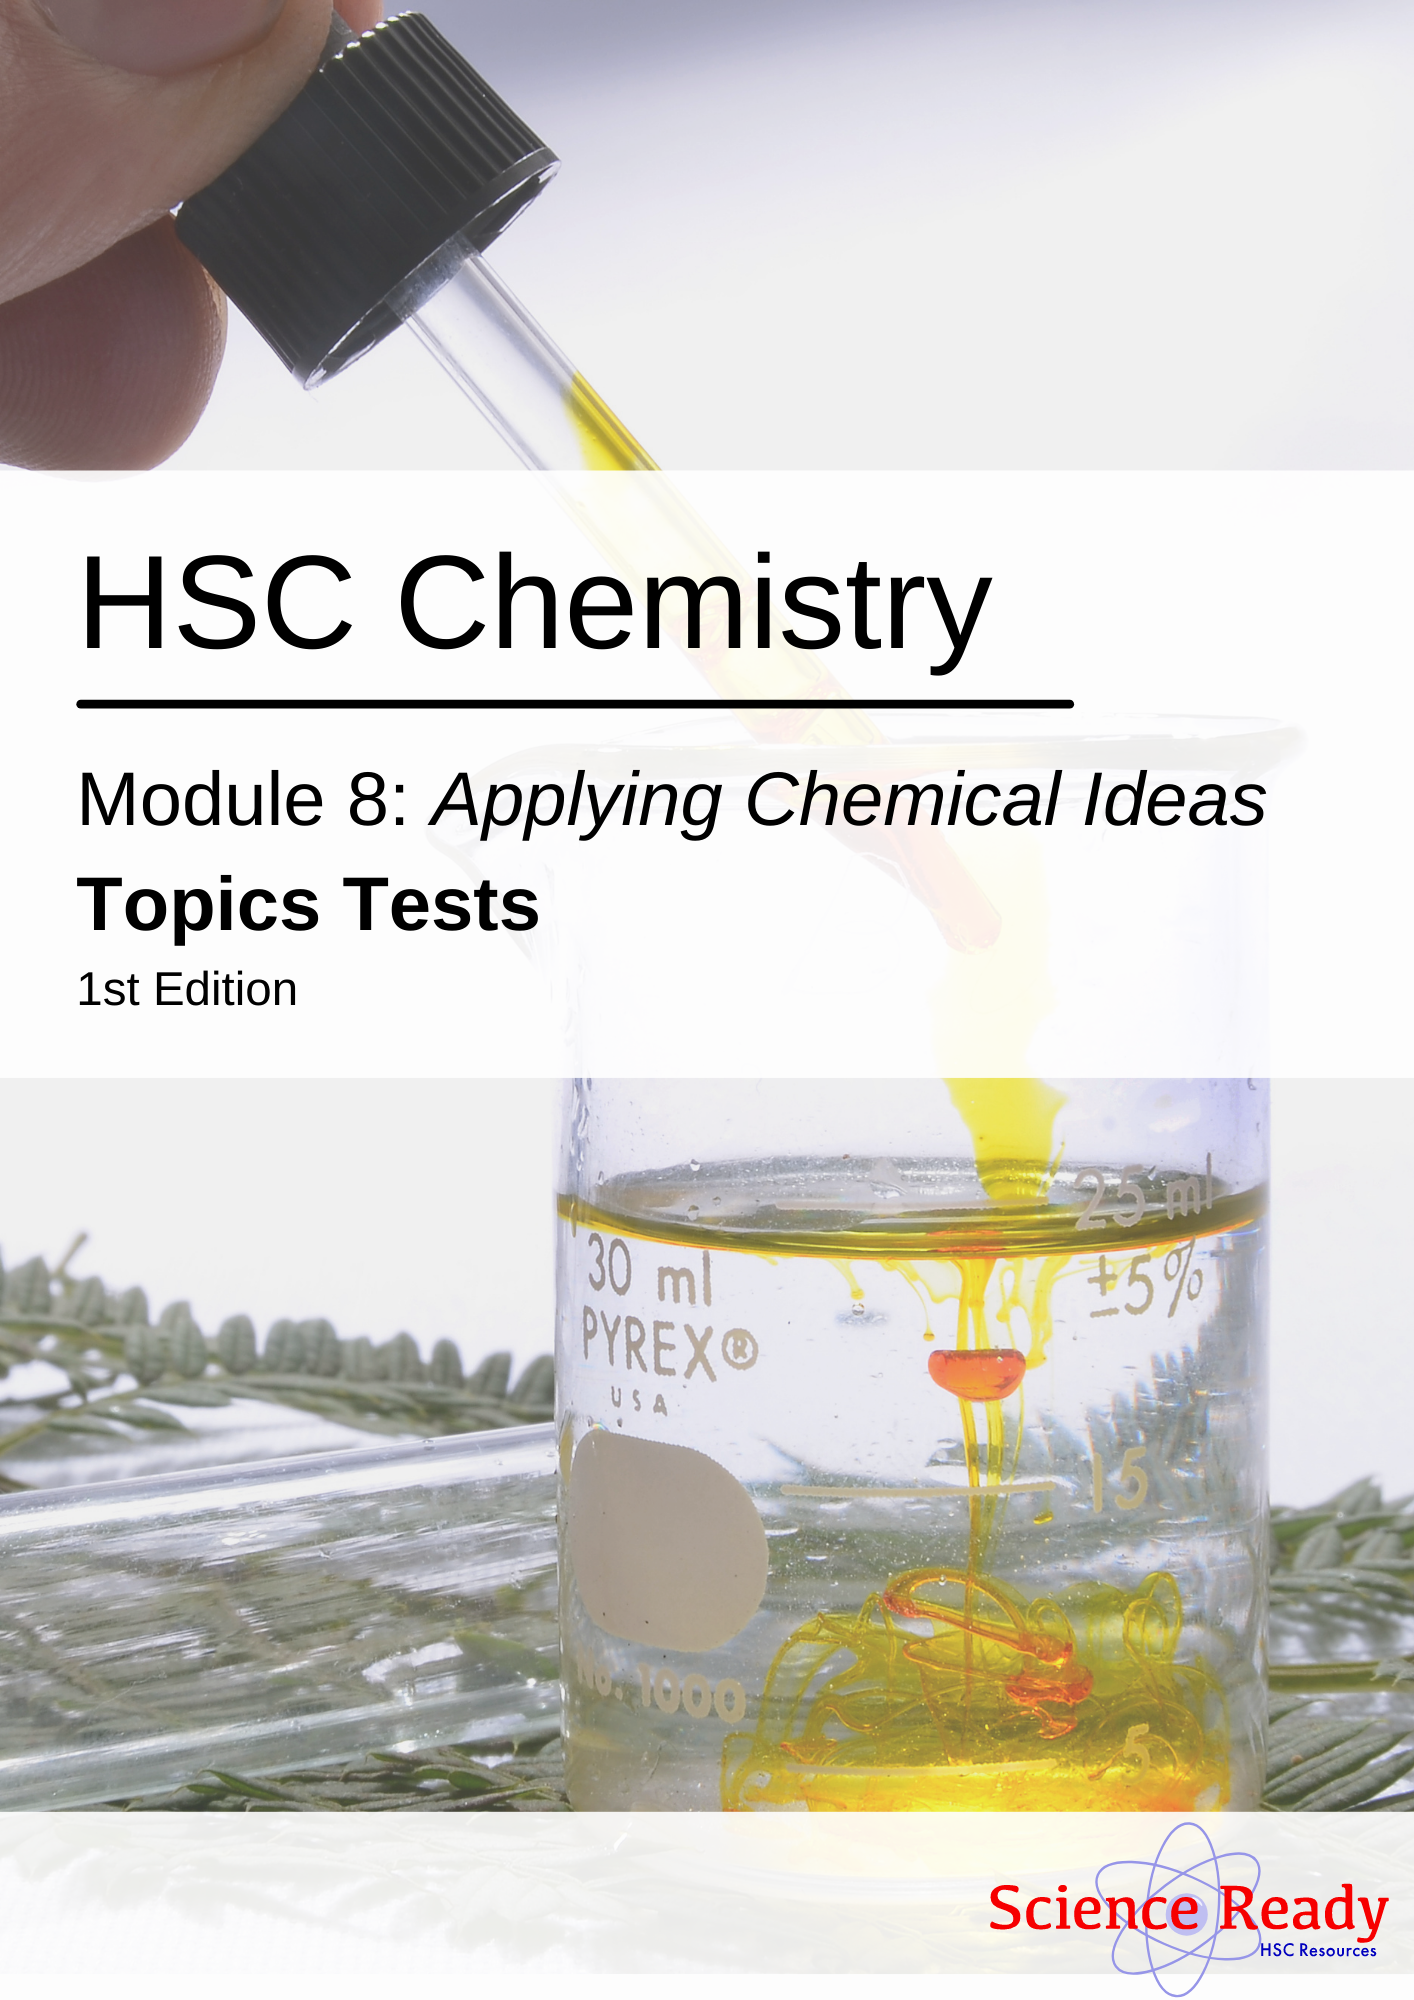 HSC Chemistry Module 8: Applying Chemical Ideas Topic Tests